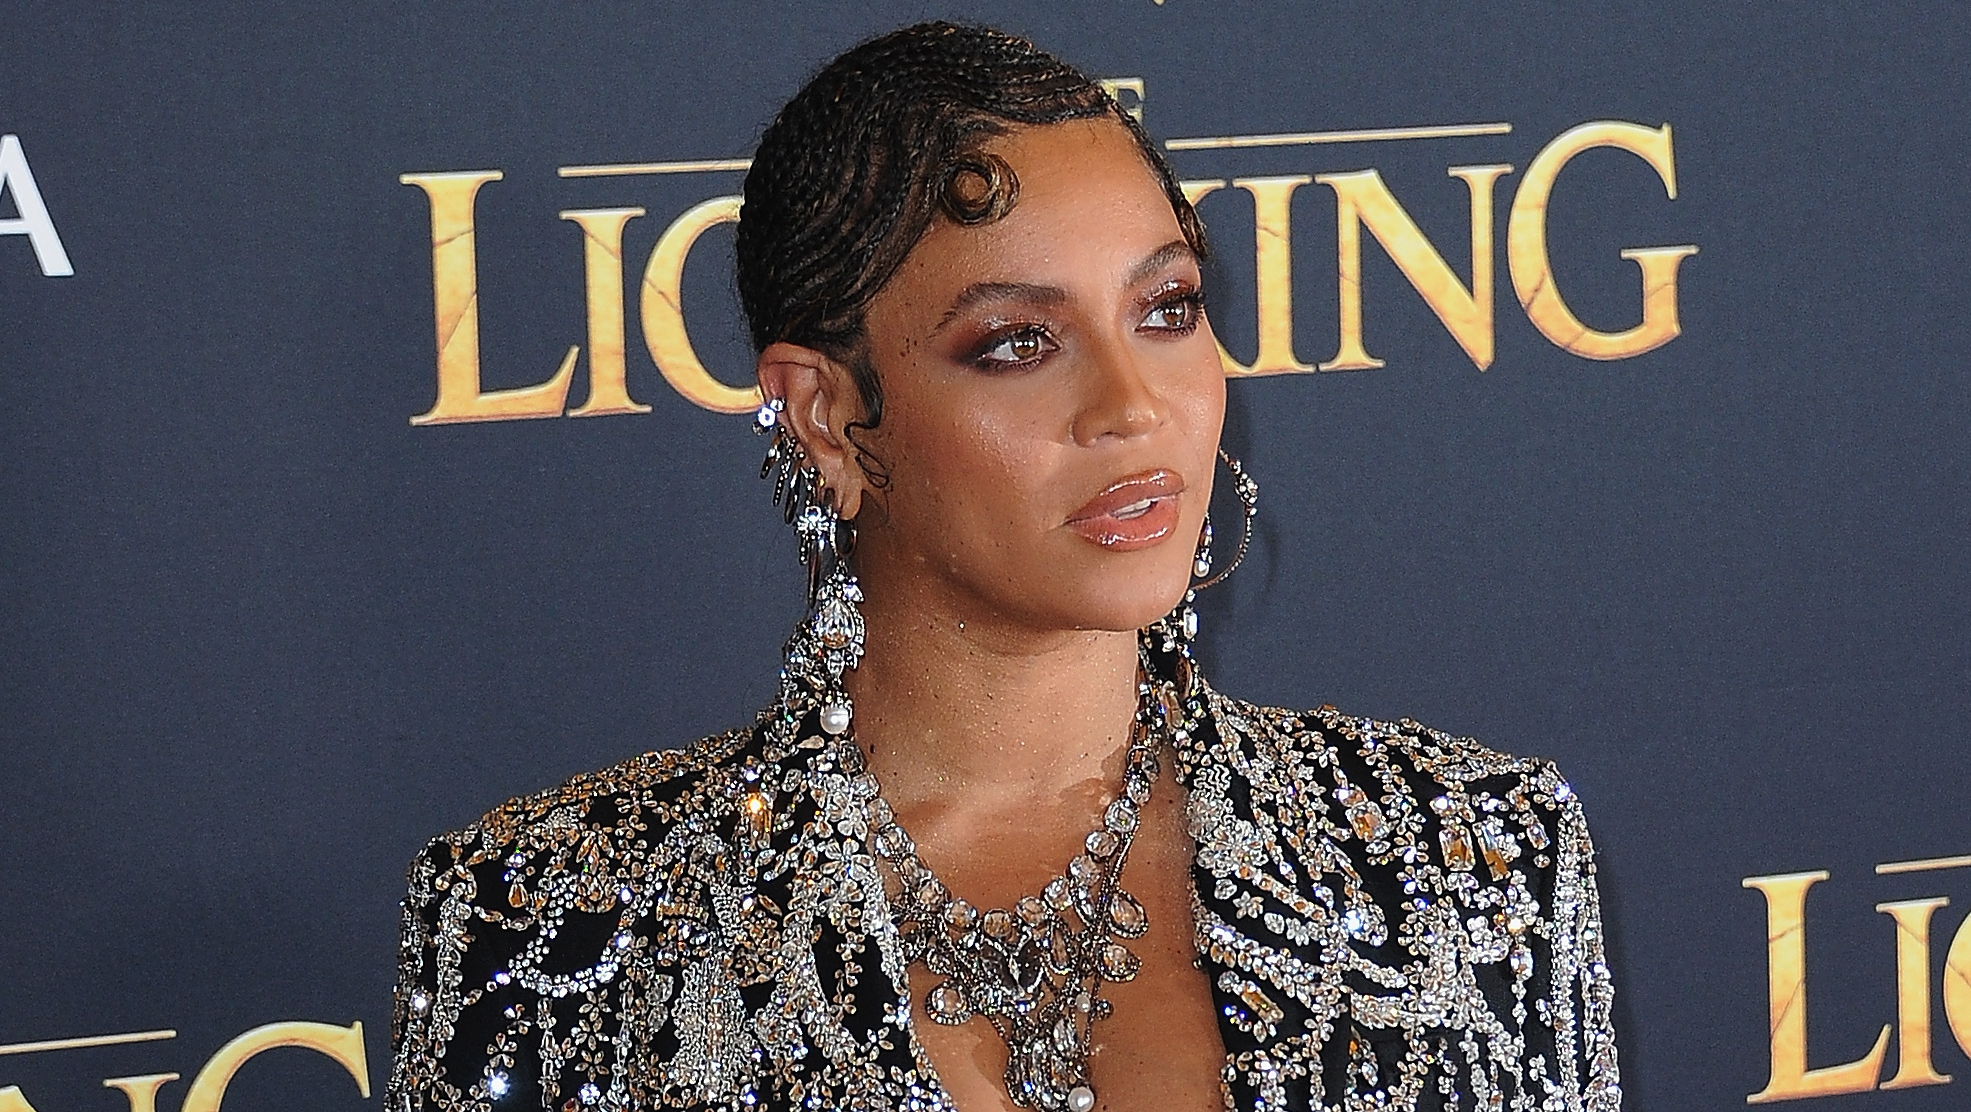 Beyoncé Fans Tell Bey to Run After Aaron Carter Reaches Out Amid Downward Spiral